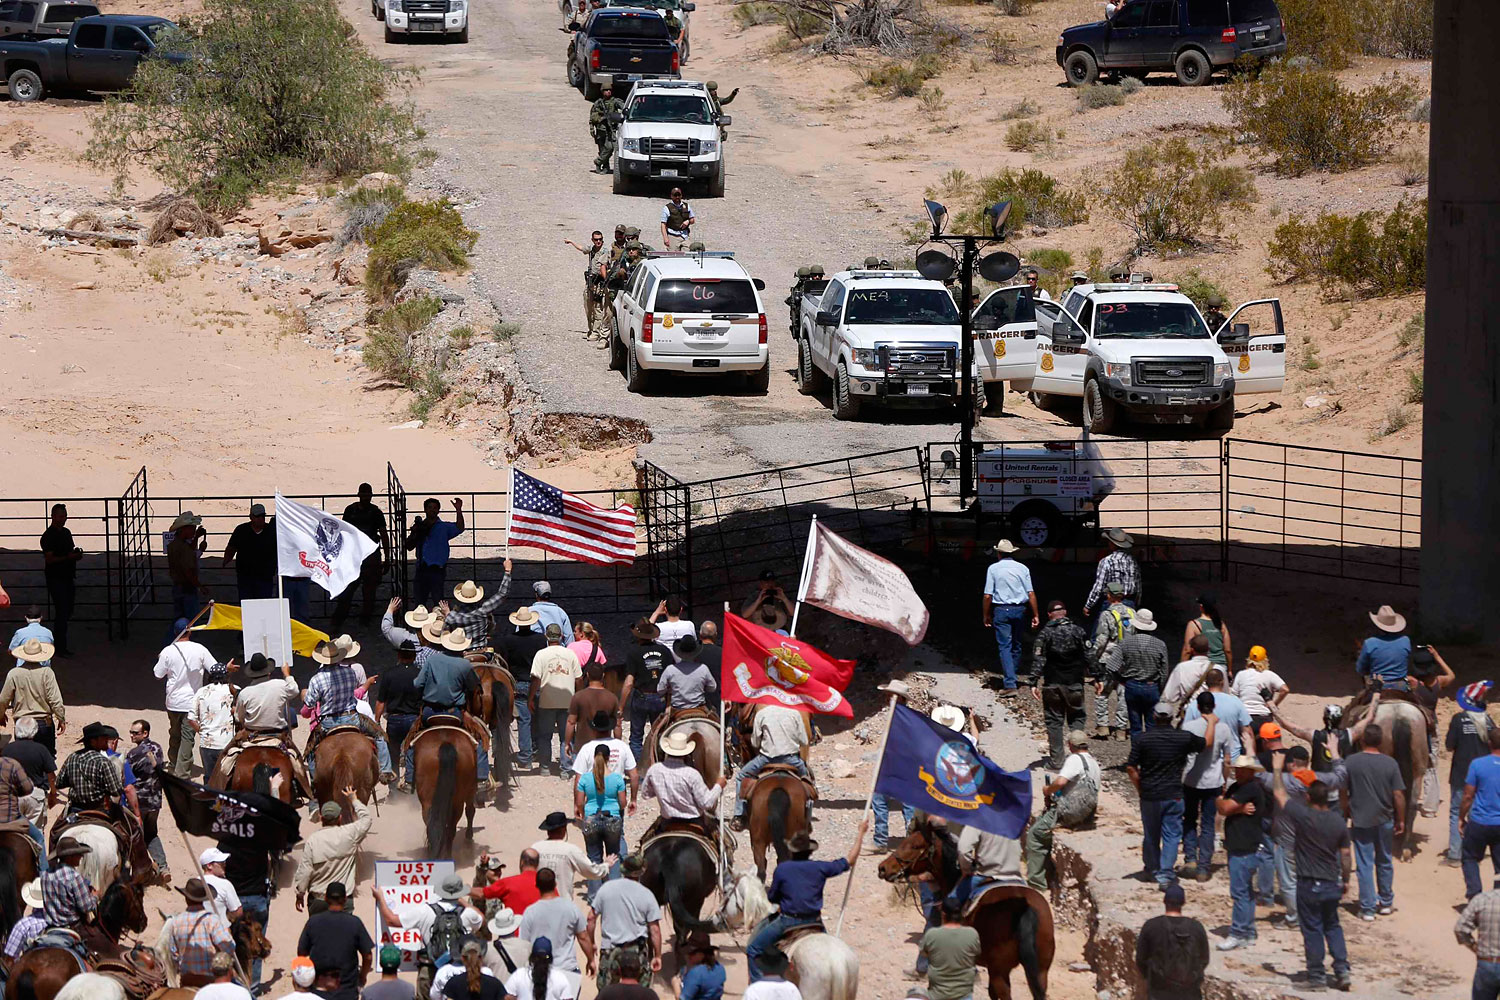 Protesters gathered at the Bureau of Land Management's base camp, where cattle that were seized from rancher Cliven Bundy was being held, near Bunkerville, Nevada, April 12, 2014.